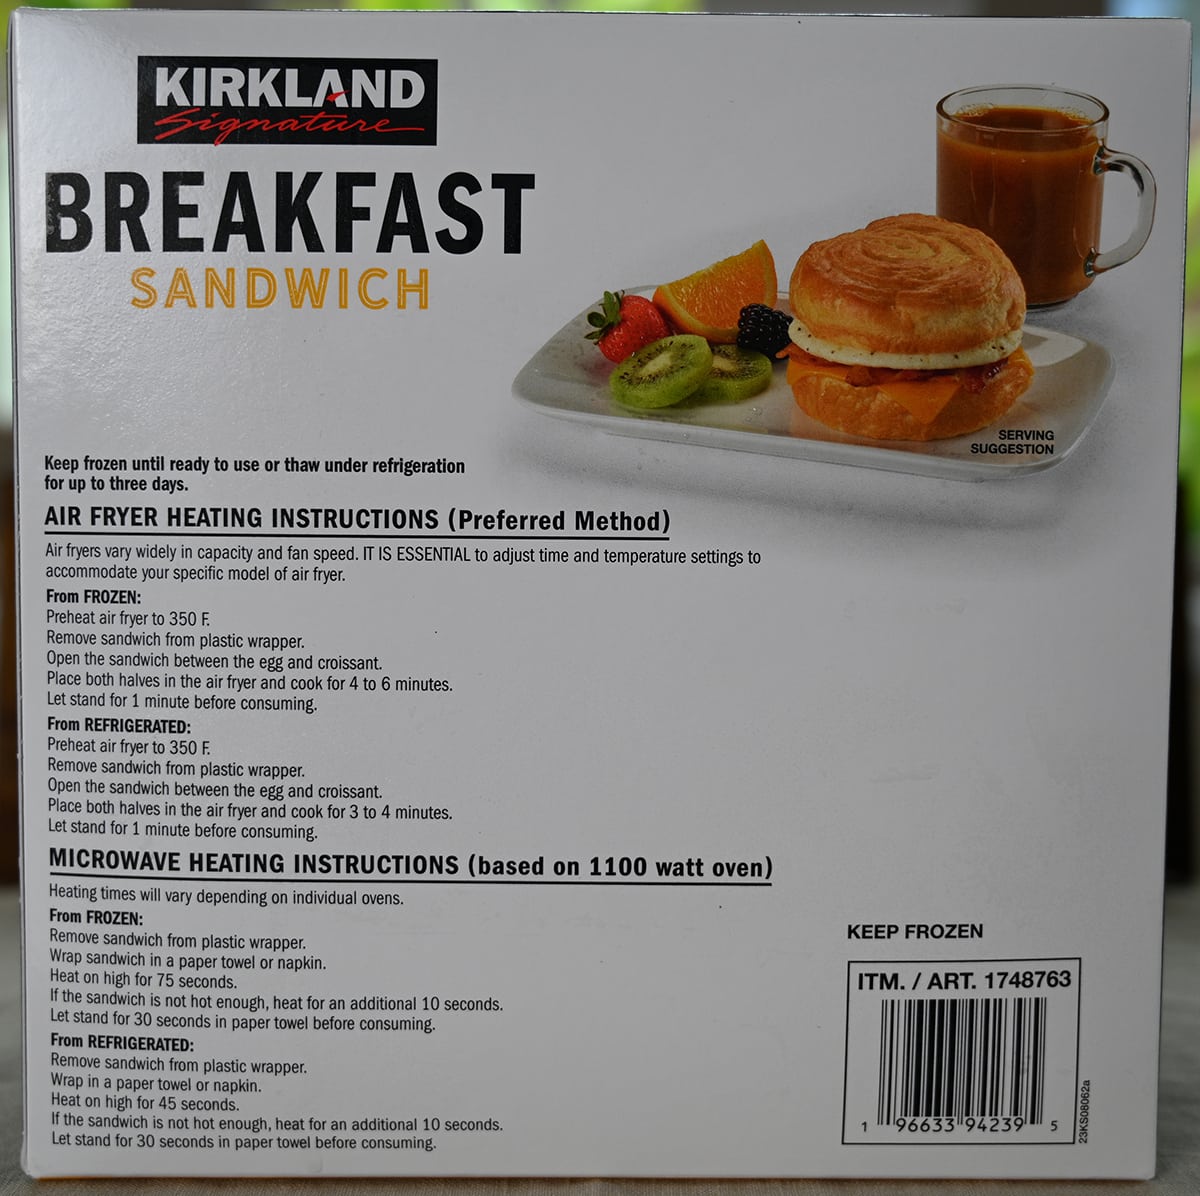 Image of the box of the Costco Kirkland Signature Breakfast Sandwich box showing heating instructions and that they need to be kept frozen.